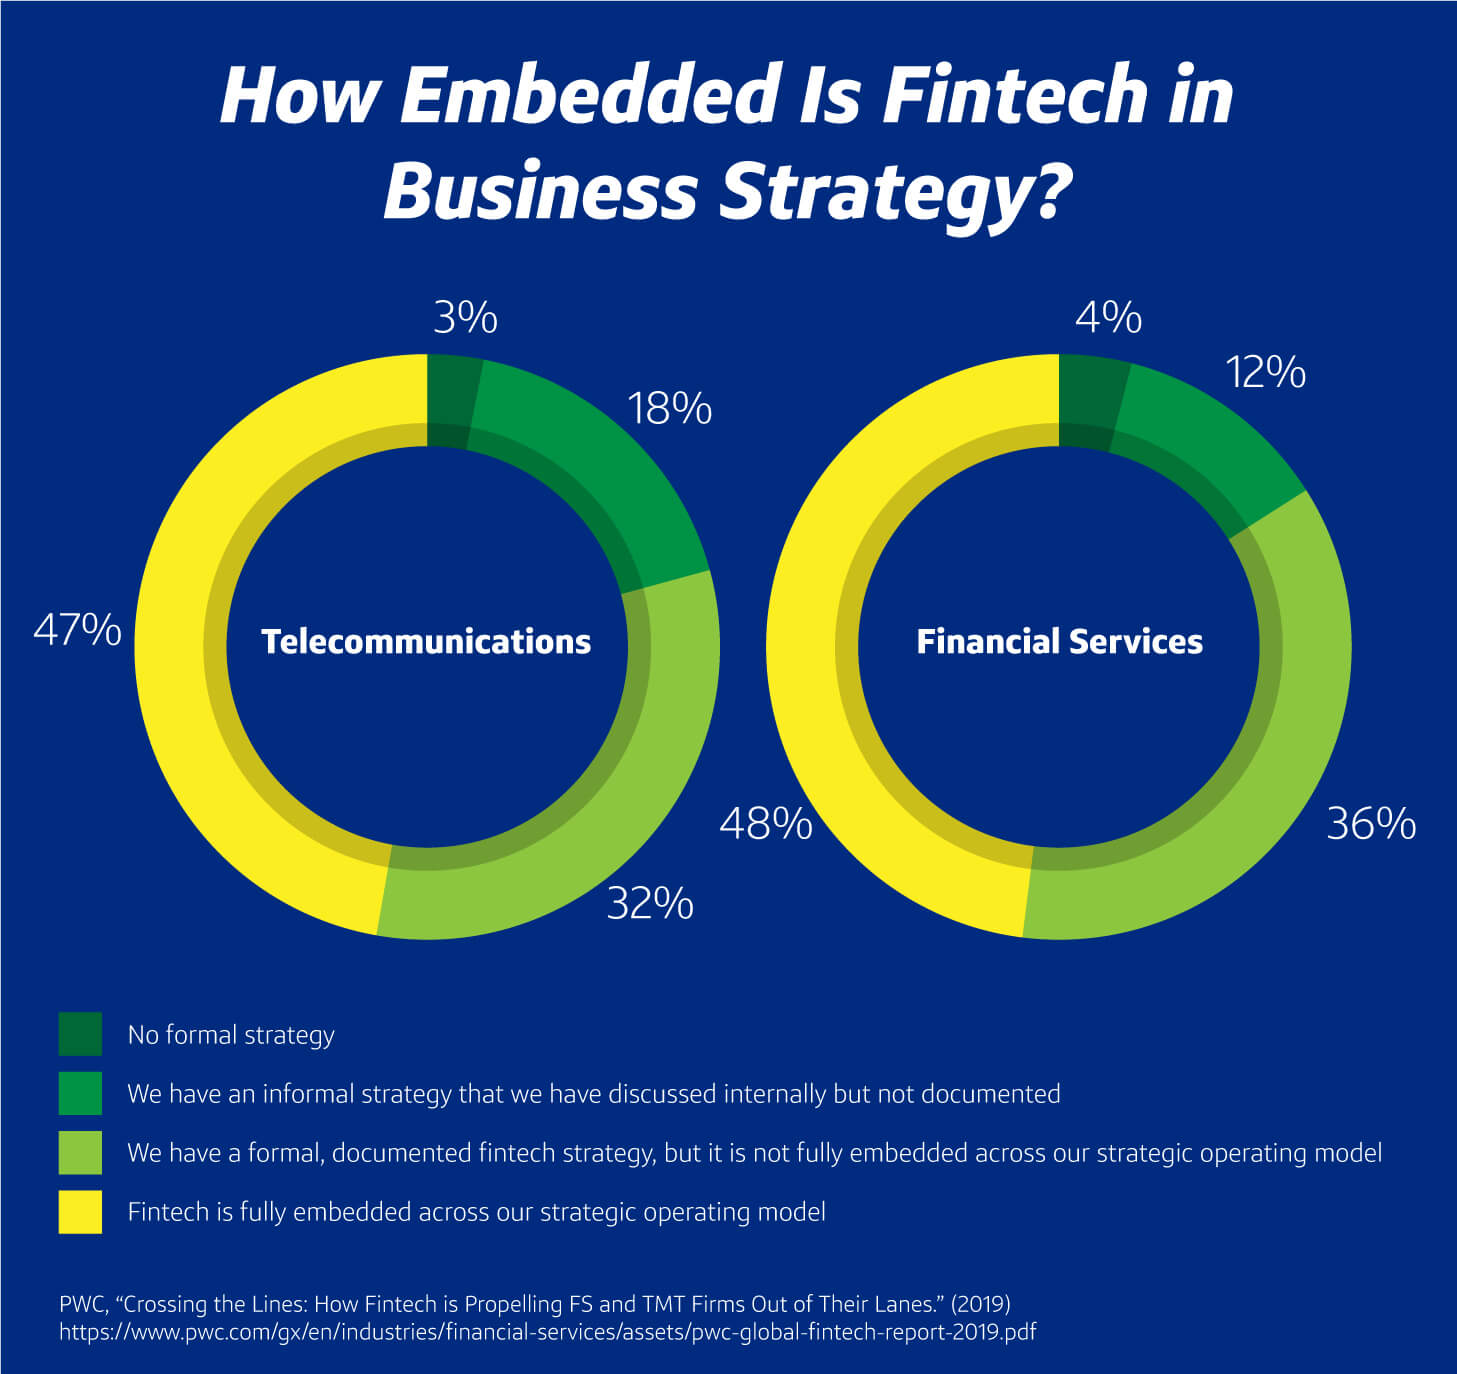 A chart showing how embedded fintech is in business strategy